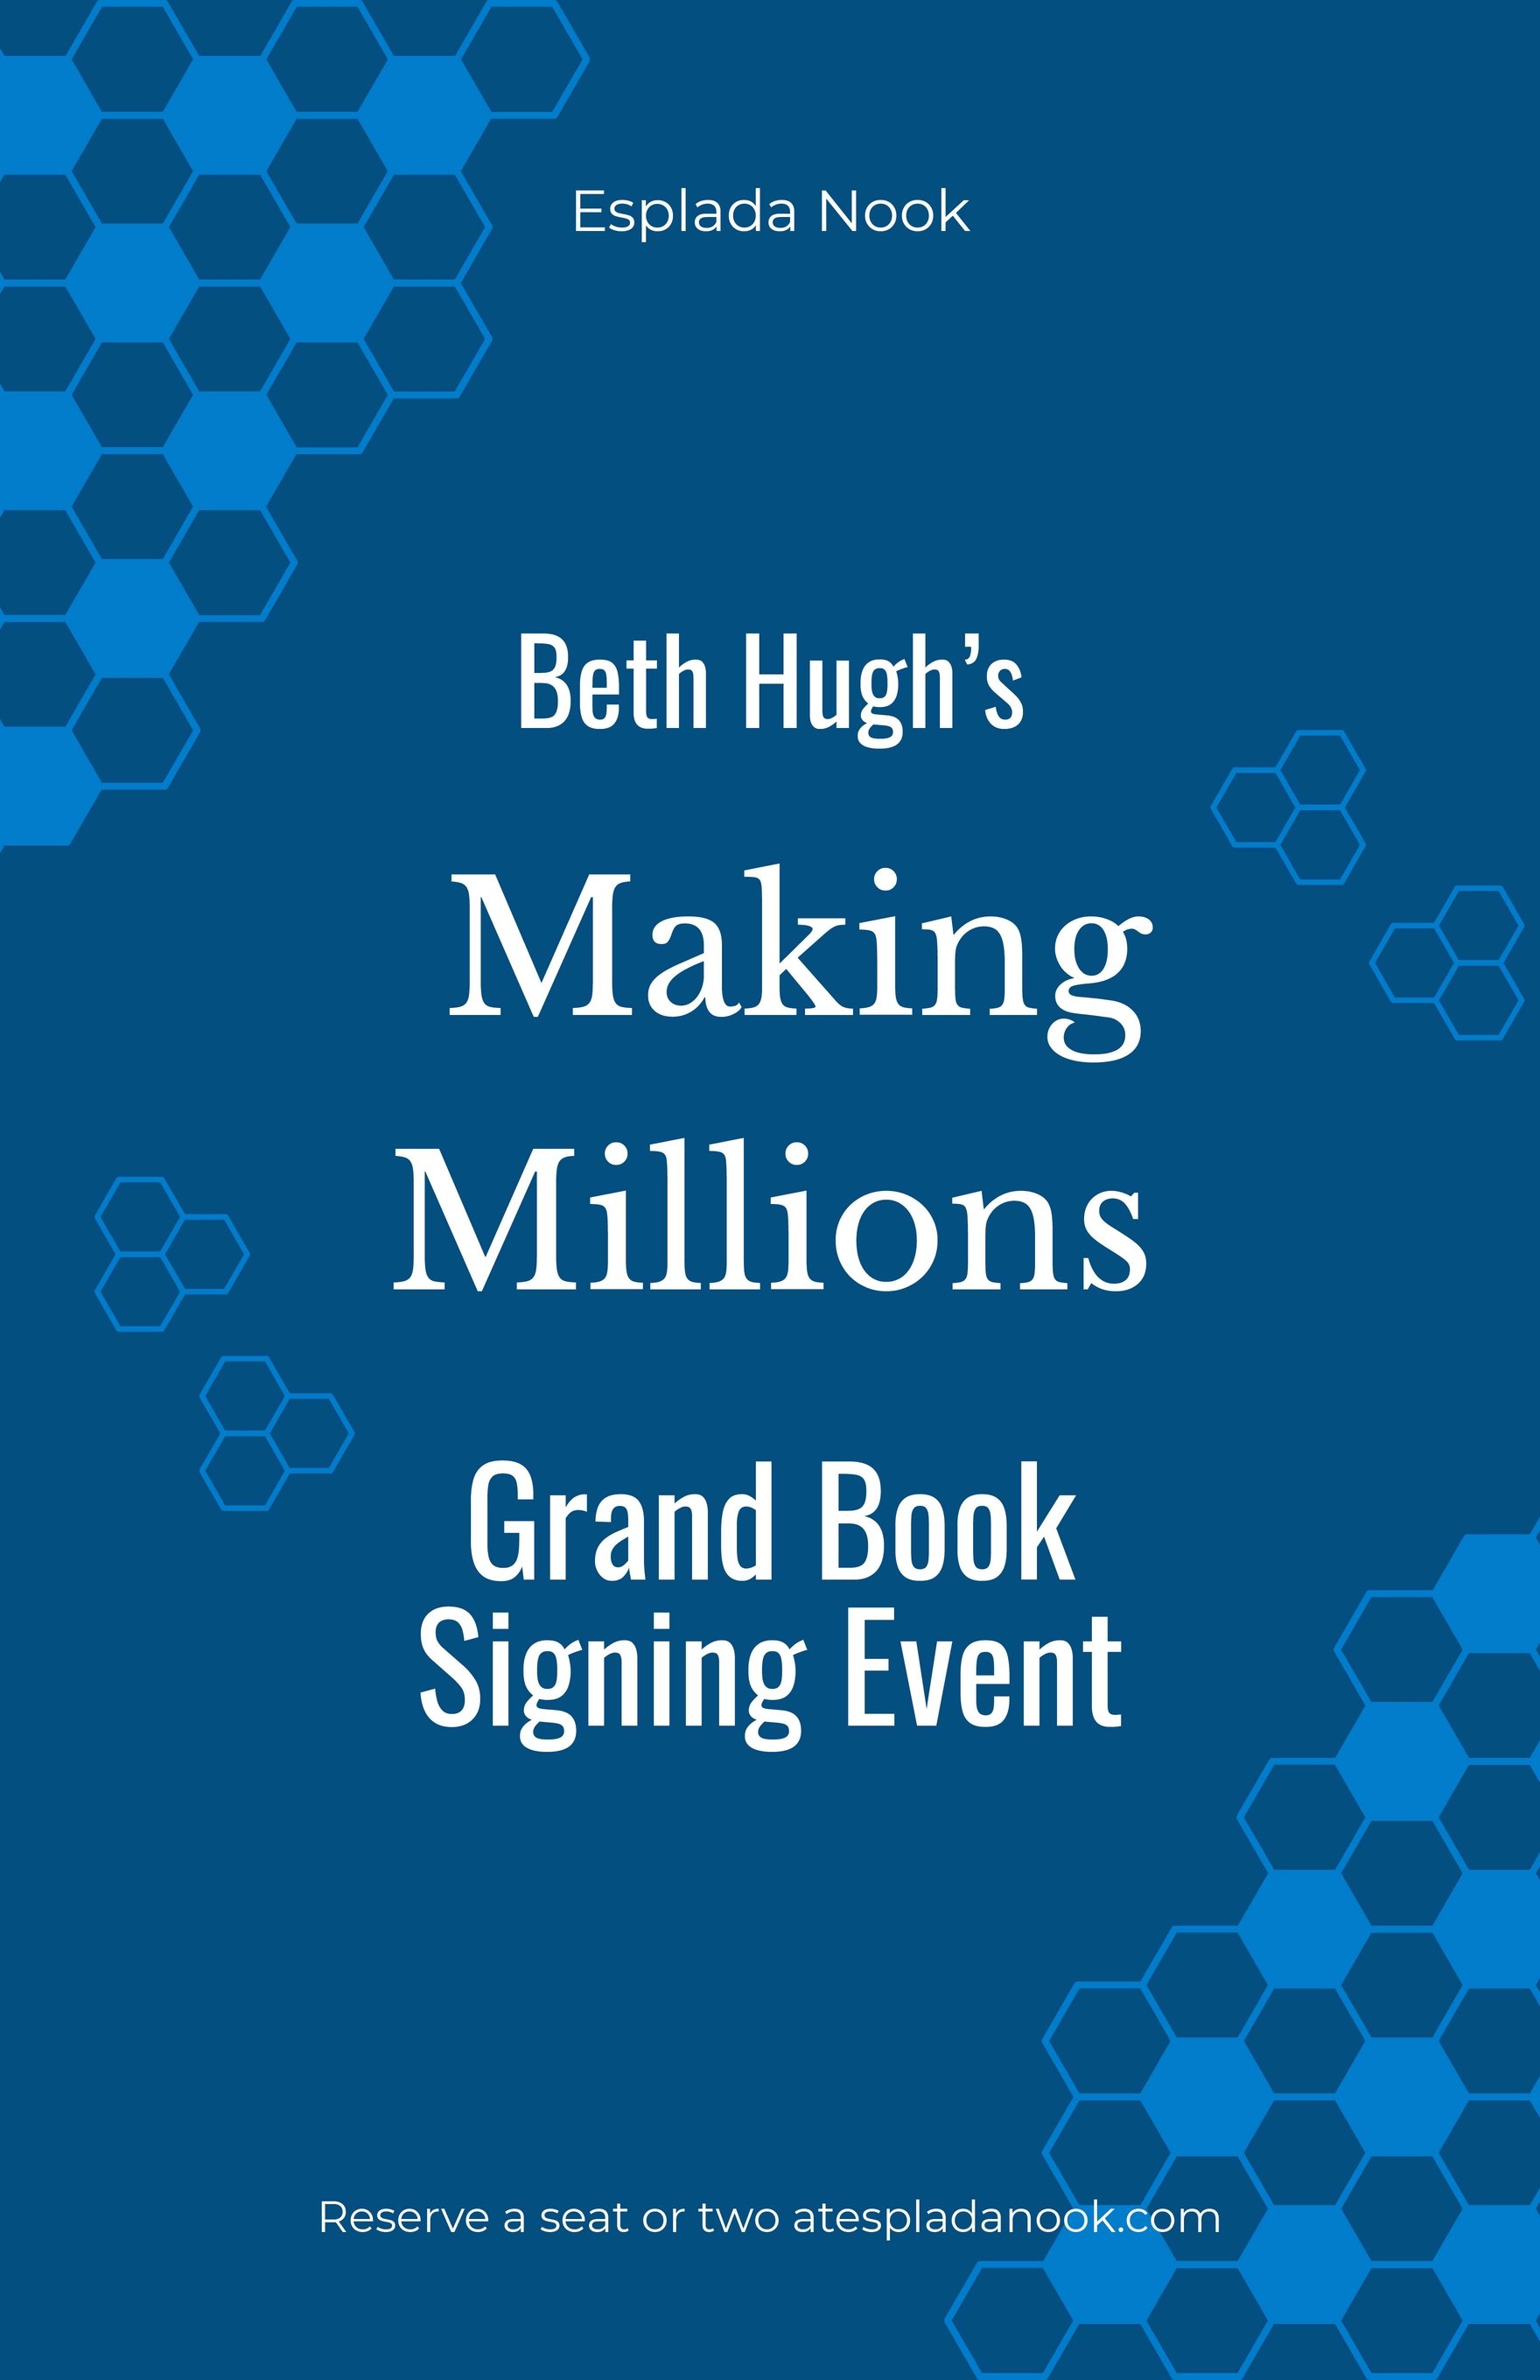 Book Signing Advertisement Poster